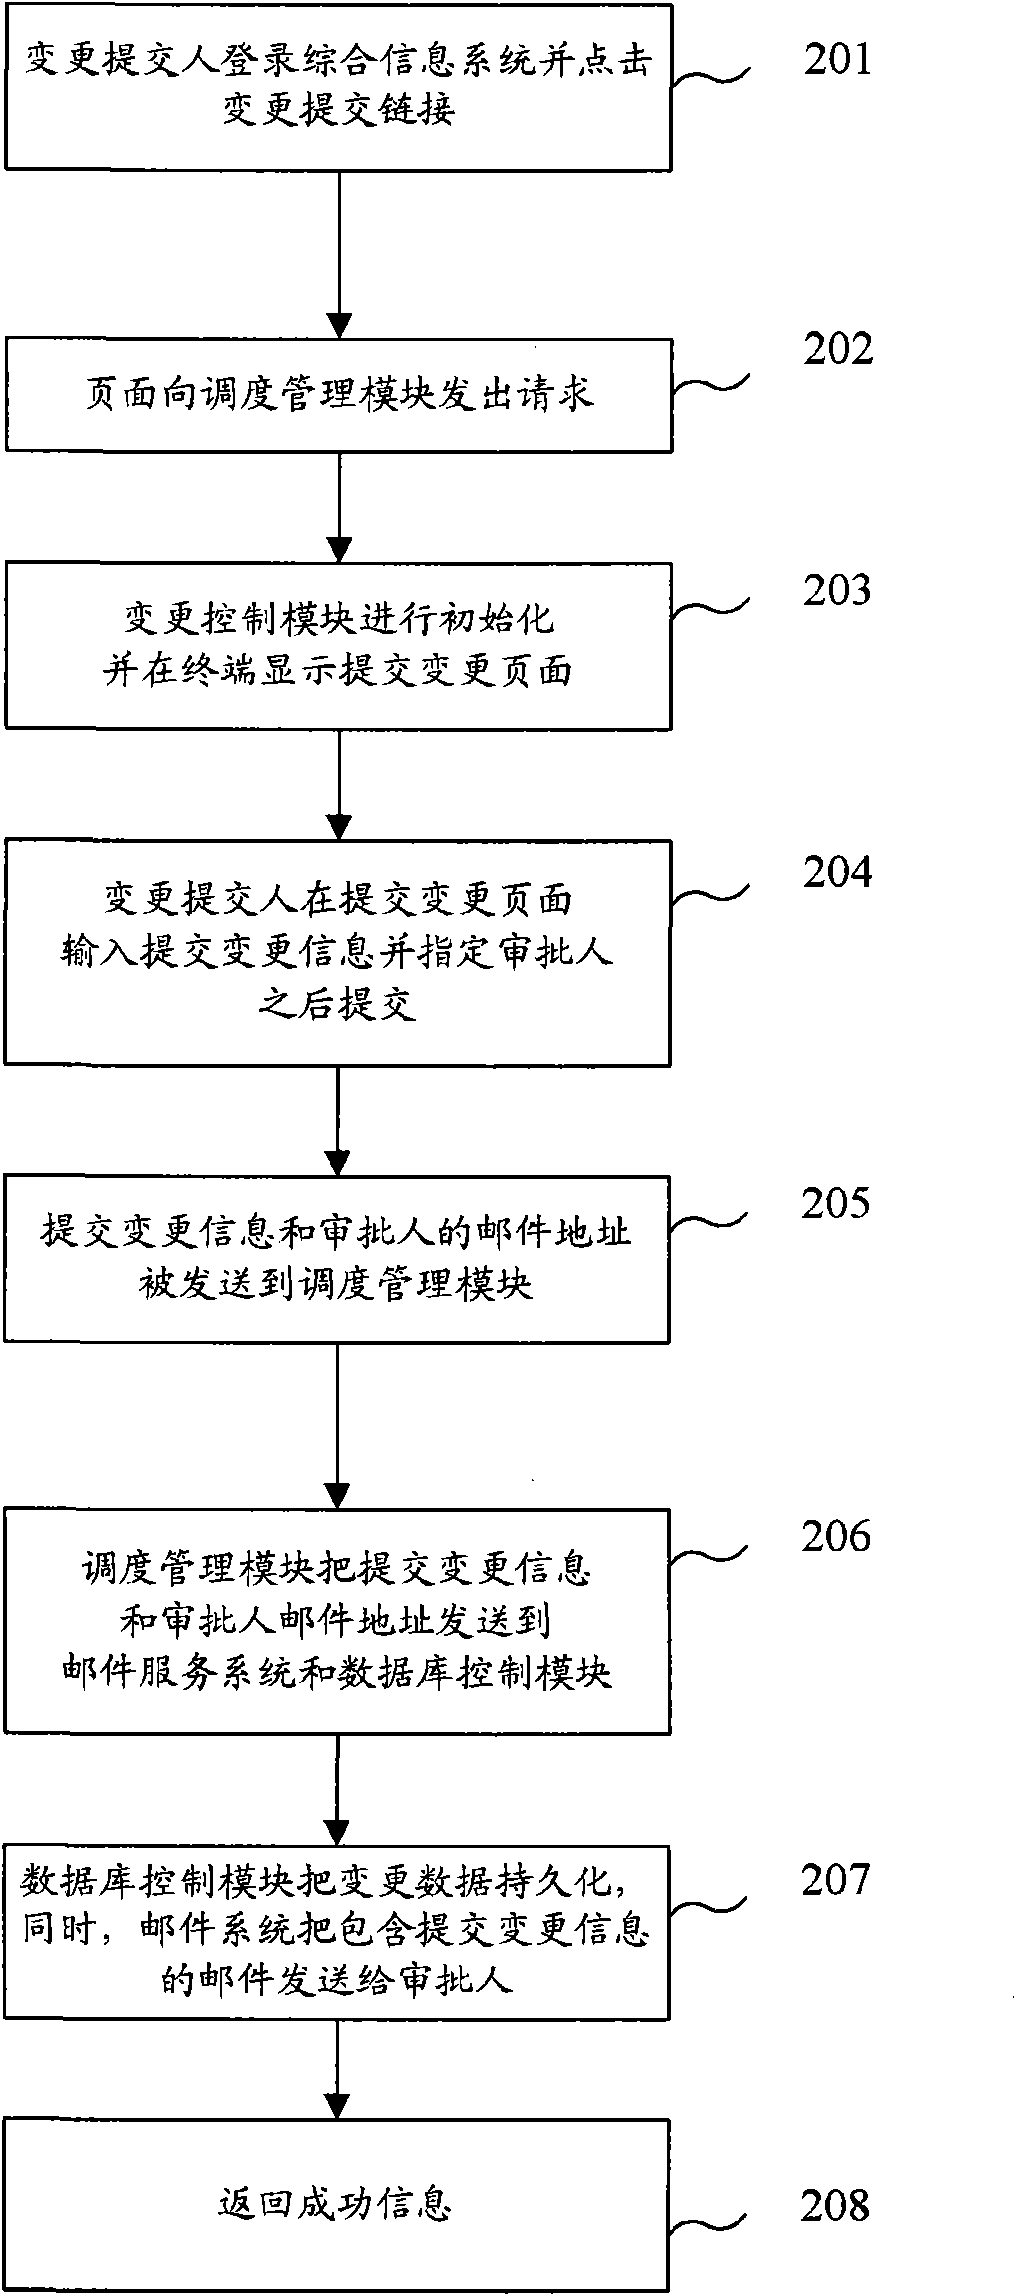 Integrated information system based on WEB and change information processing method